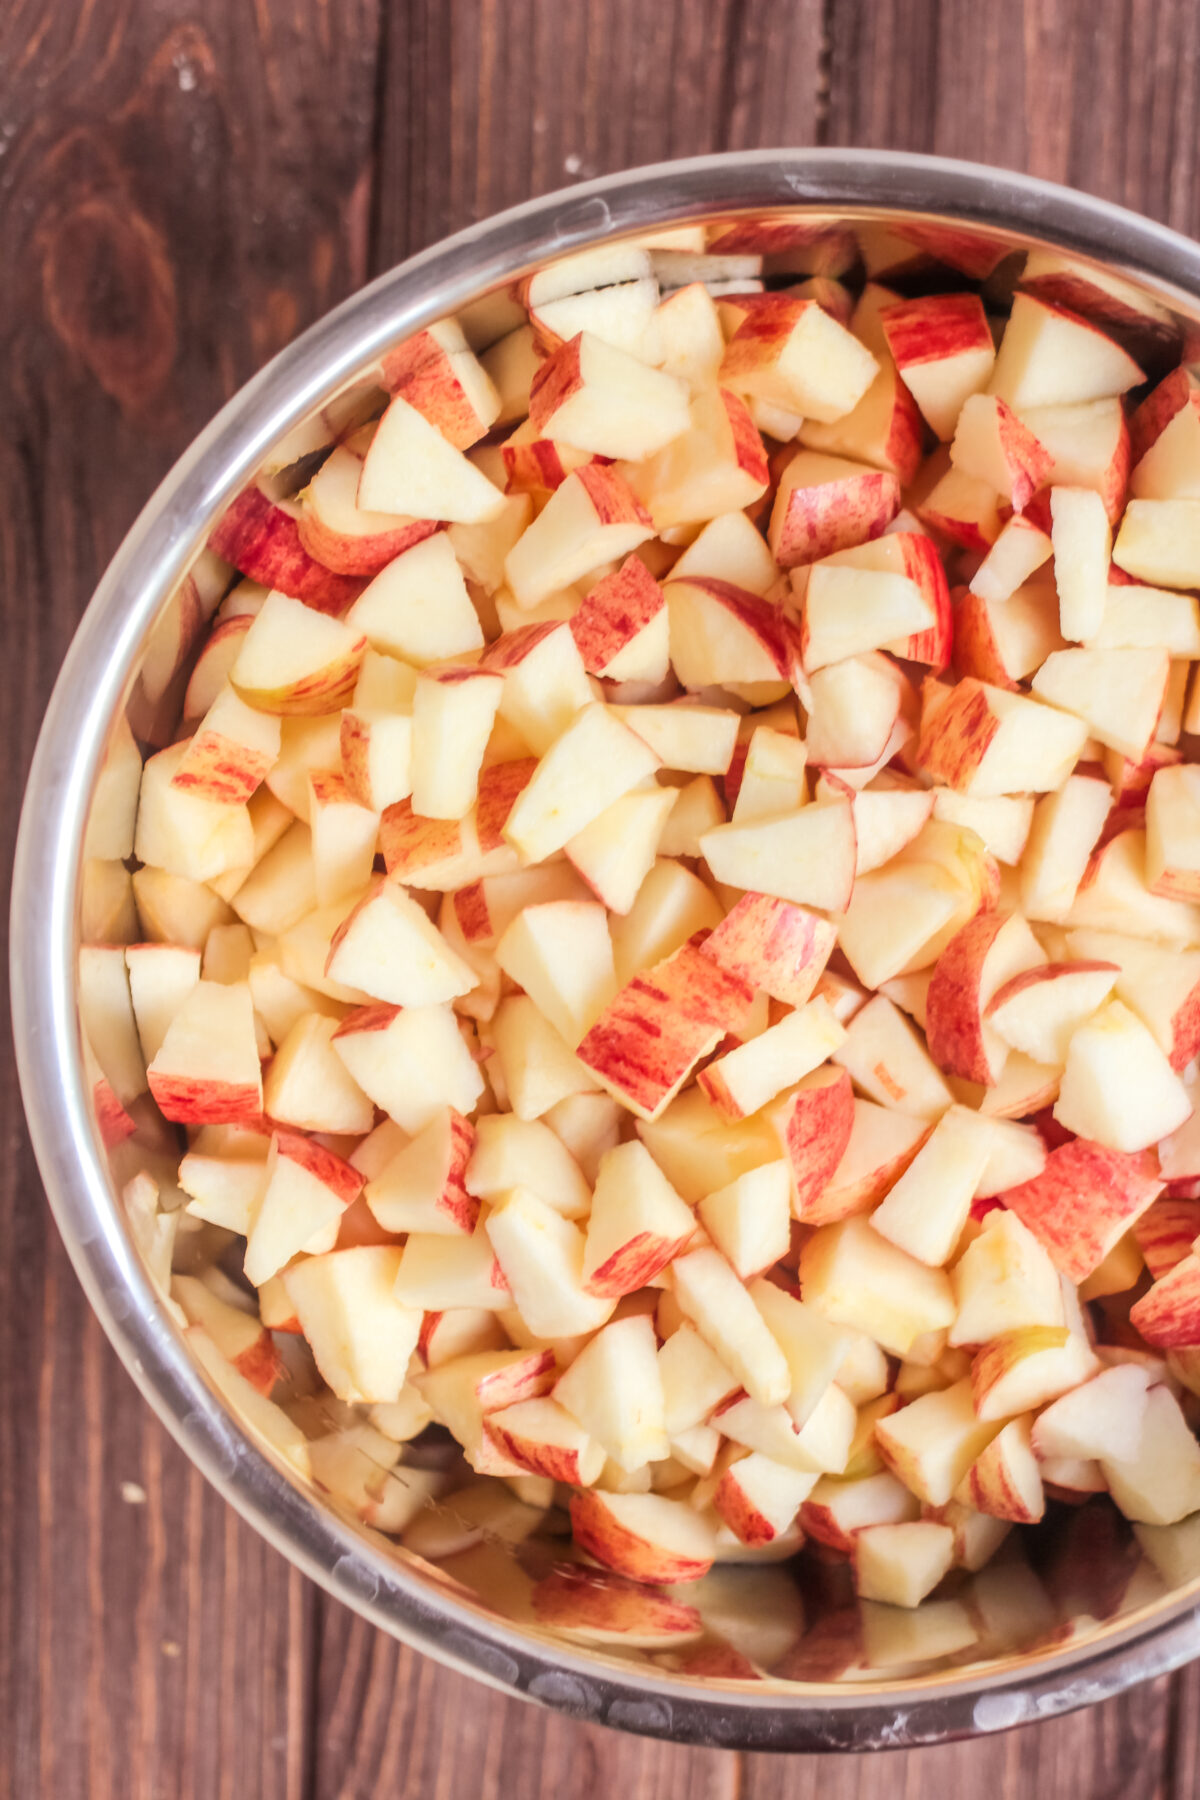 Chopped apples in the pot of an instant pot.